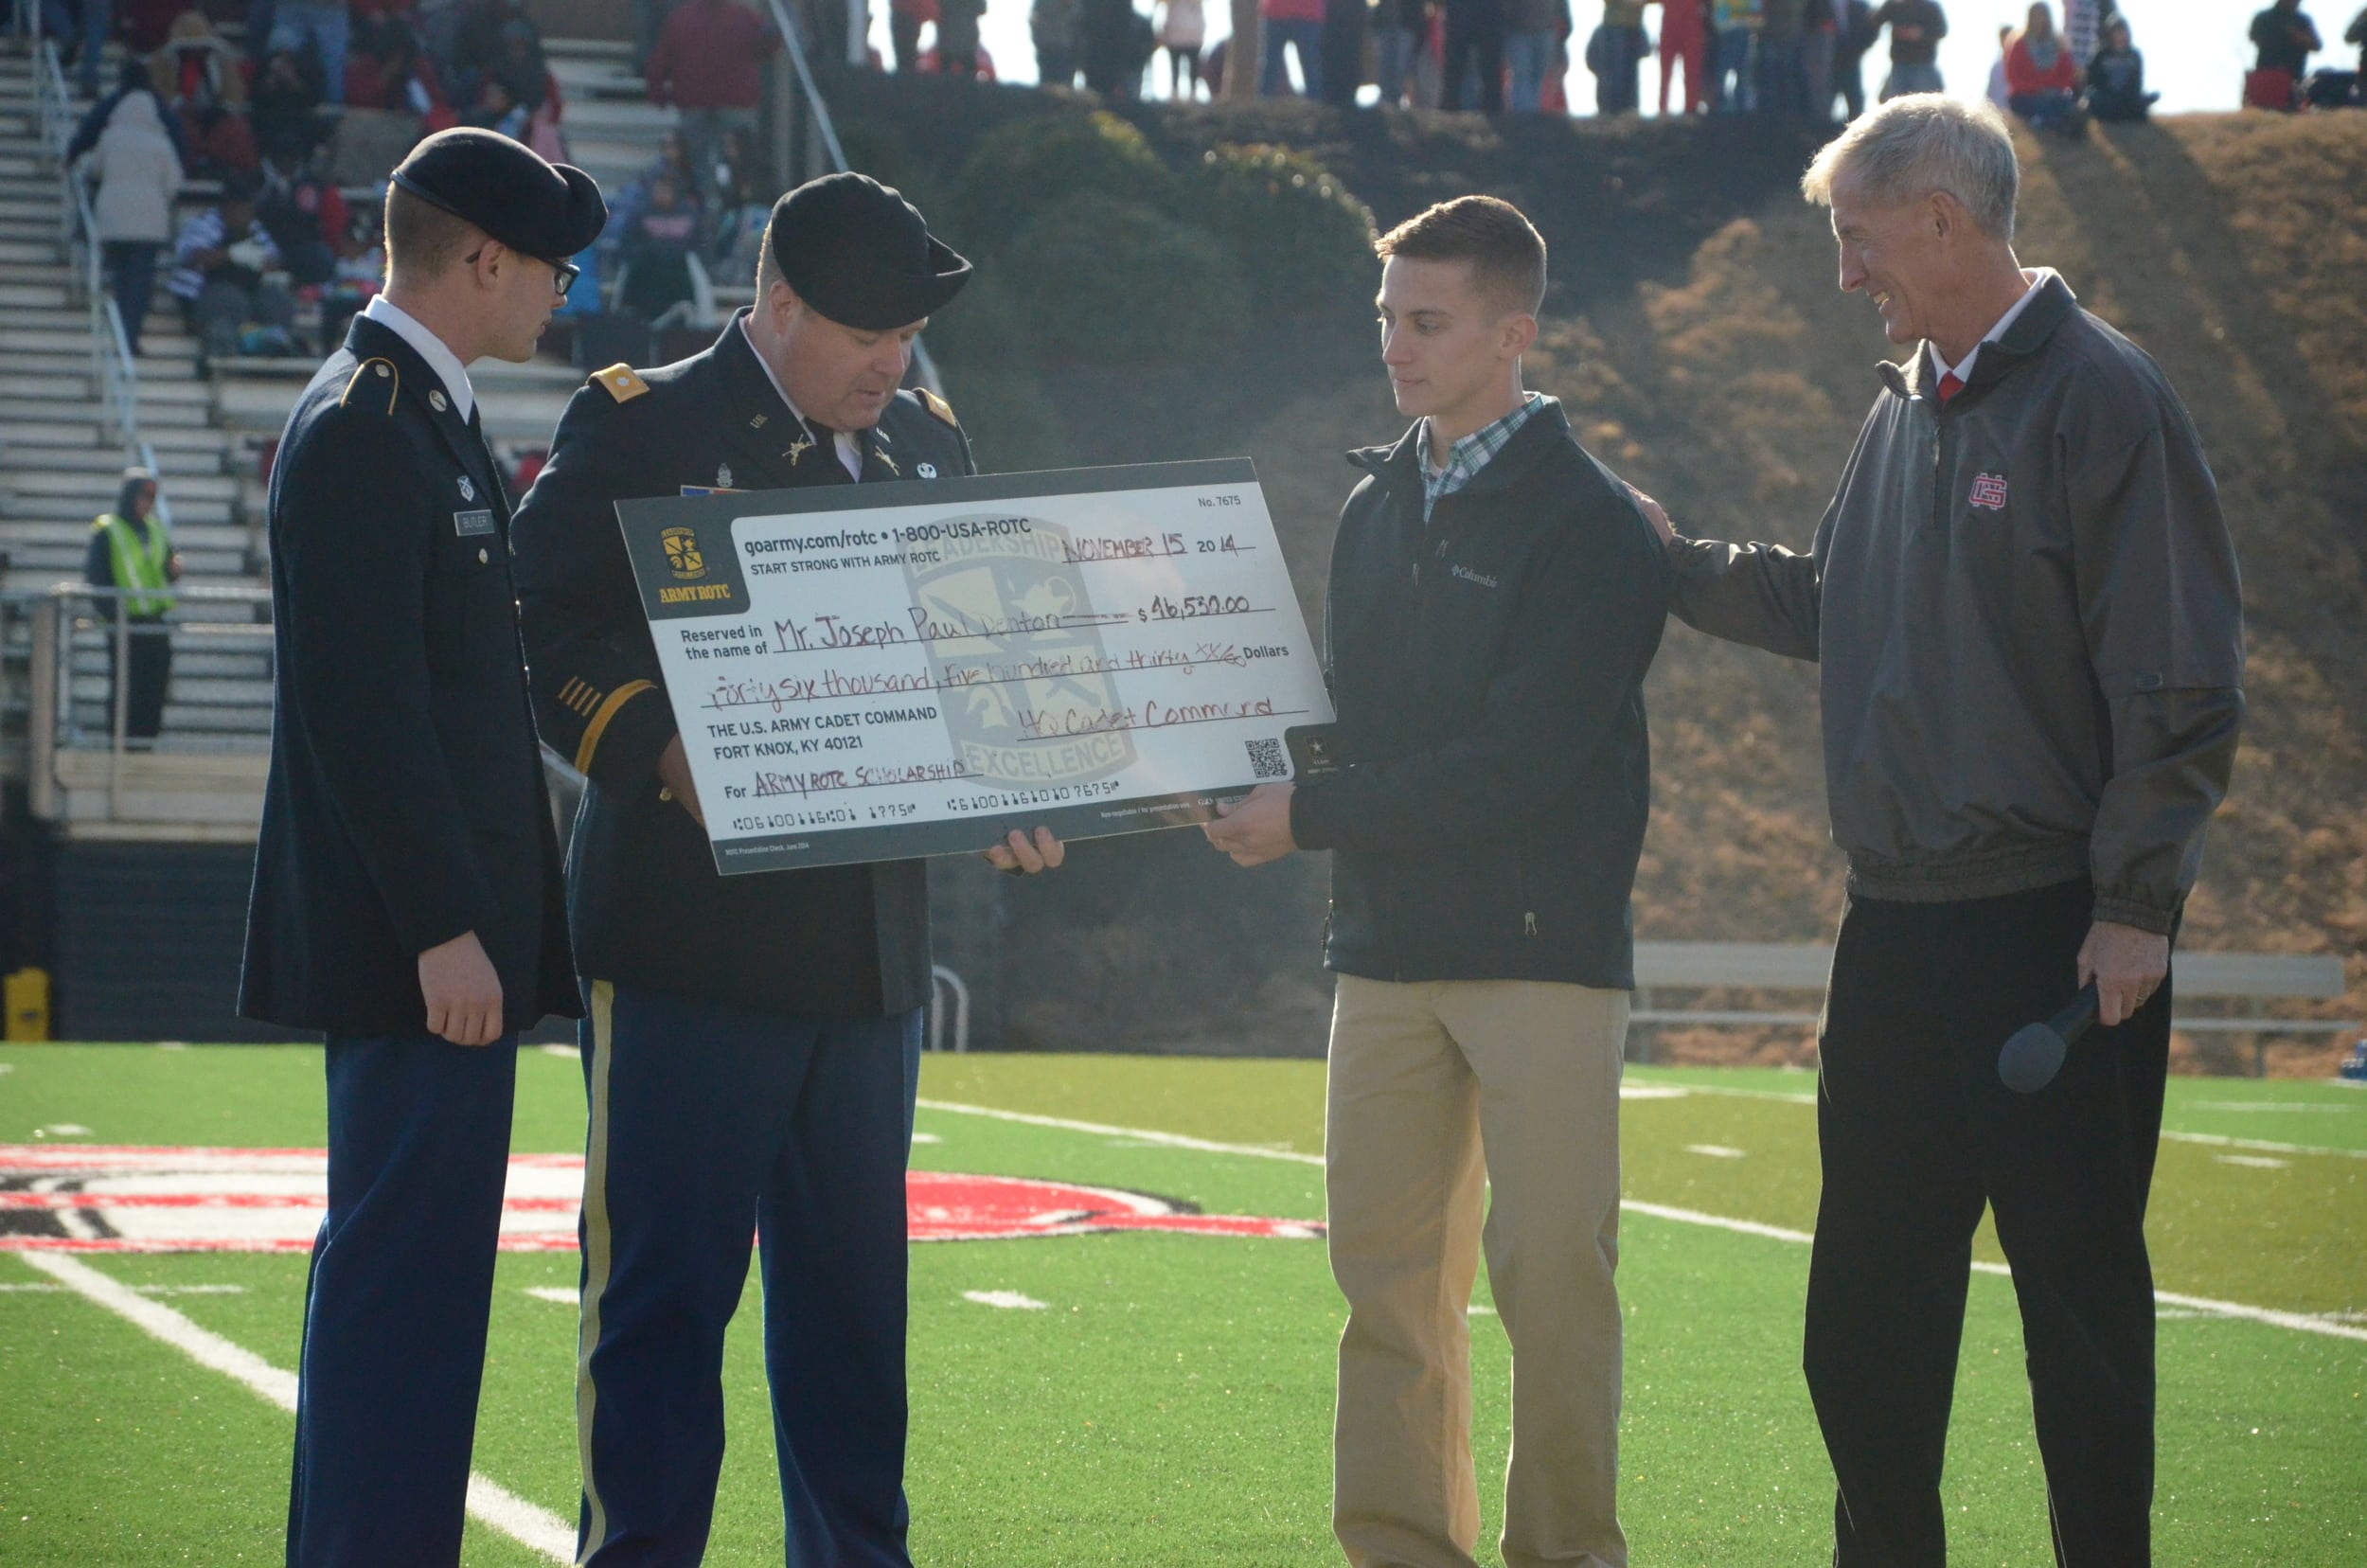  The U.S. Army is giving Joseph Denton a check to support his pursuit in the ROTC. 